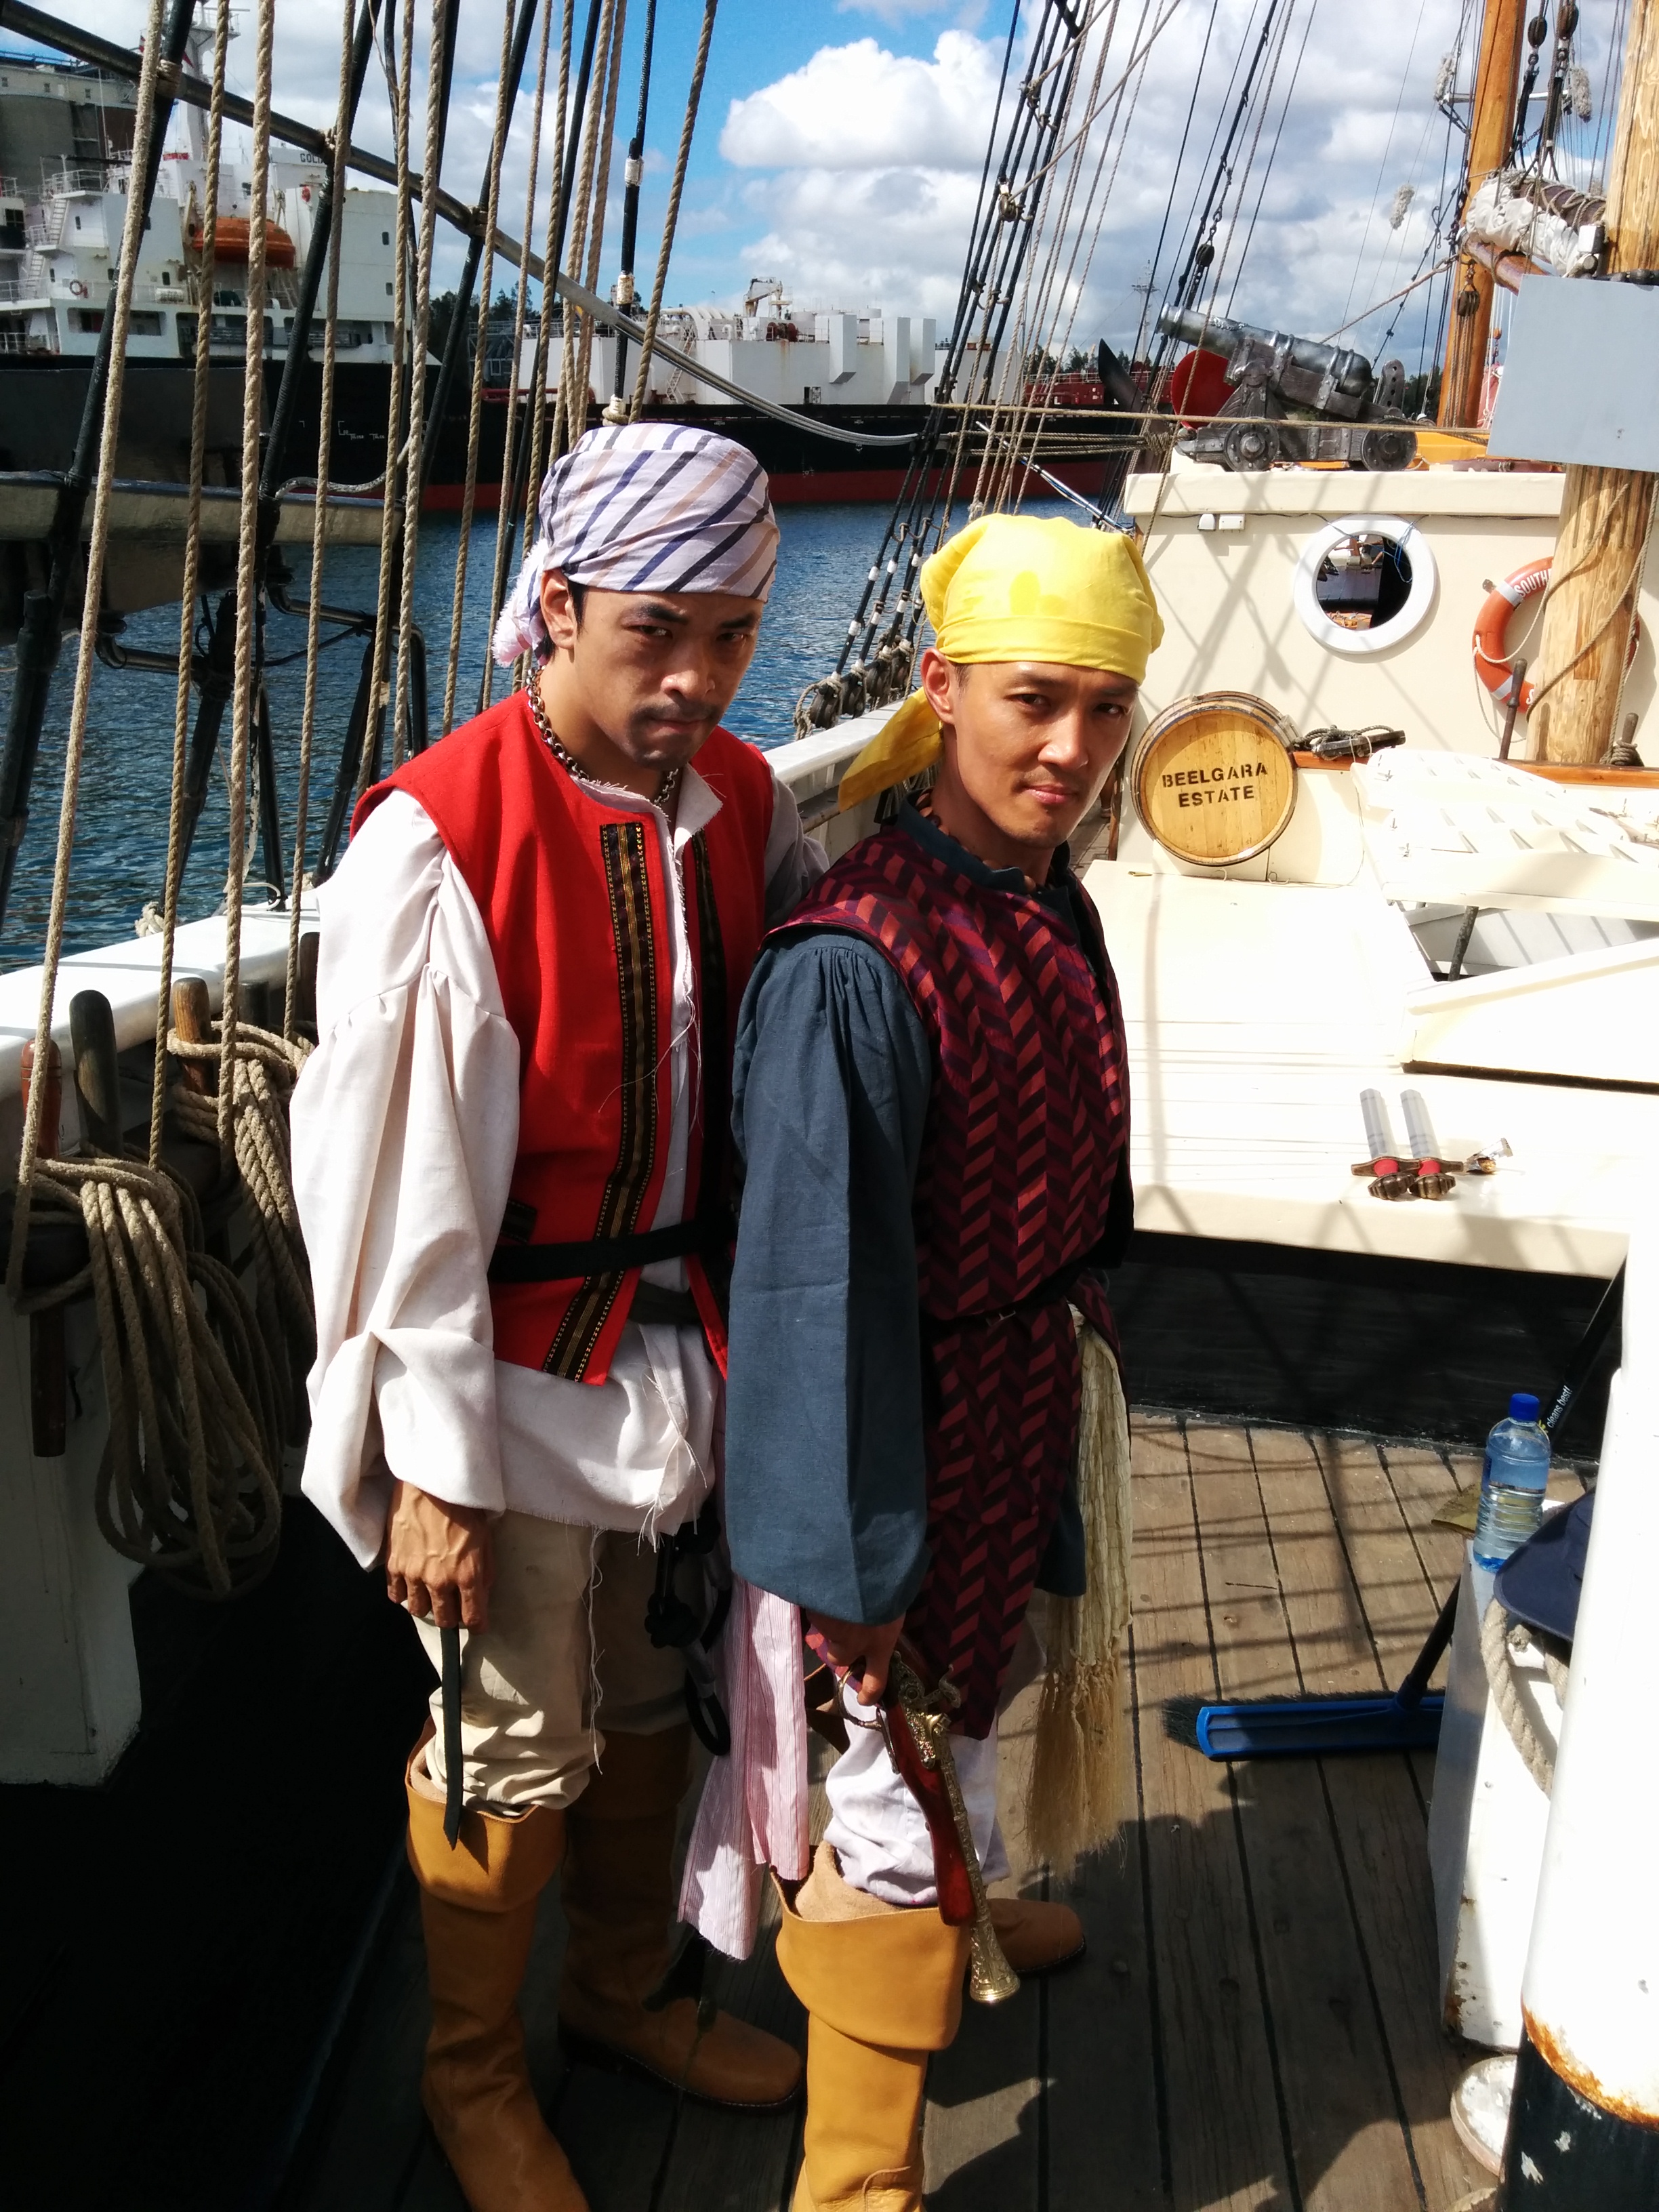 Jonathan Chan and Khanh Trieu in costume for 'Attack of the Pirates' theatre show on the Southern Swan Sydney Harbour tallship, 2014